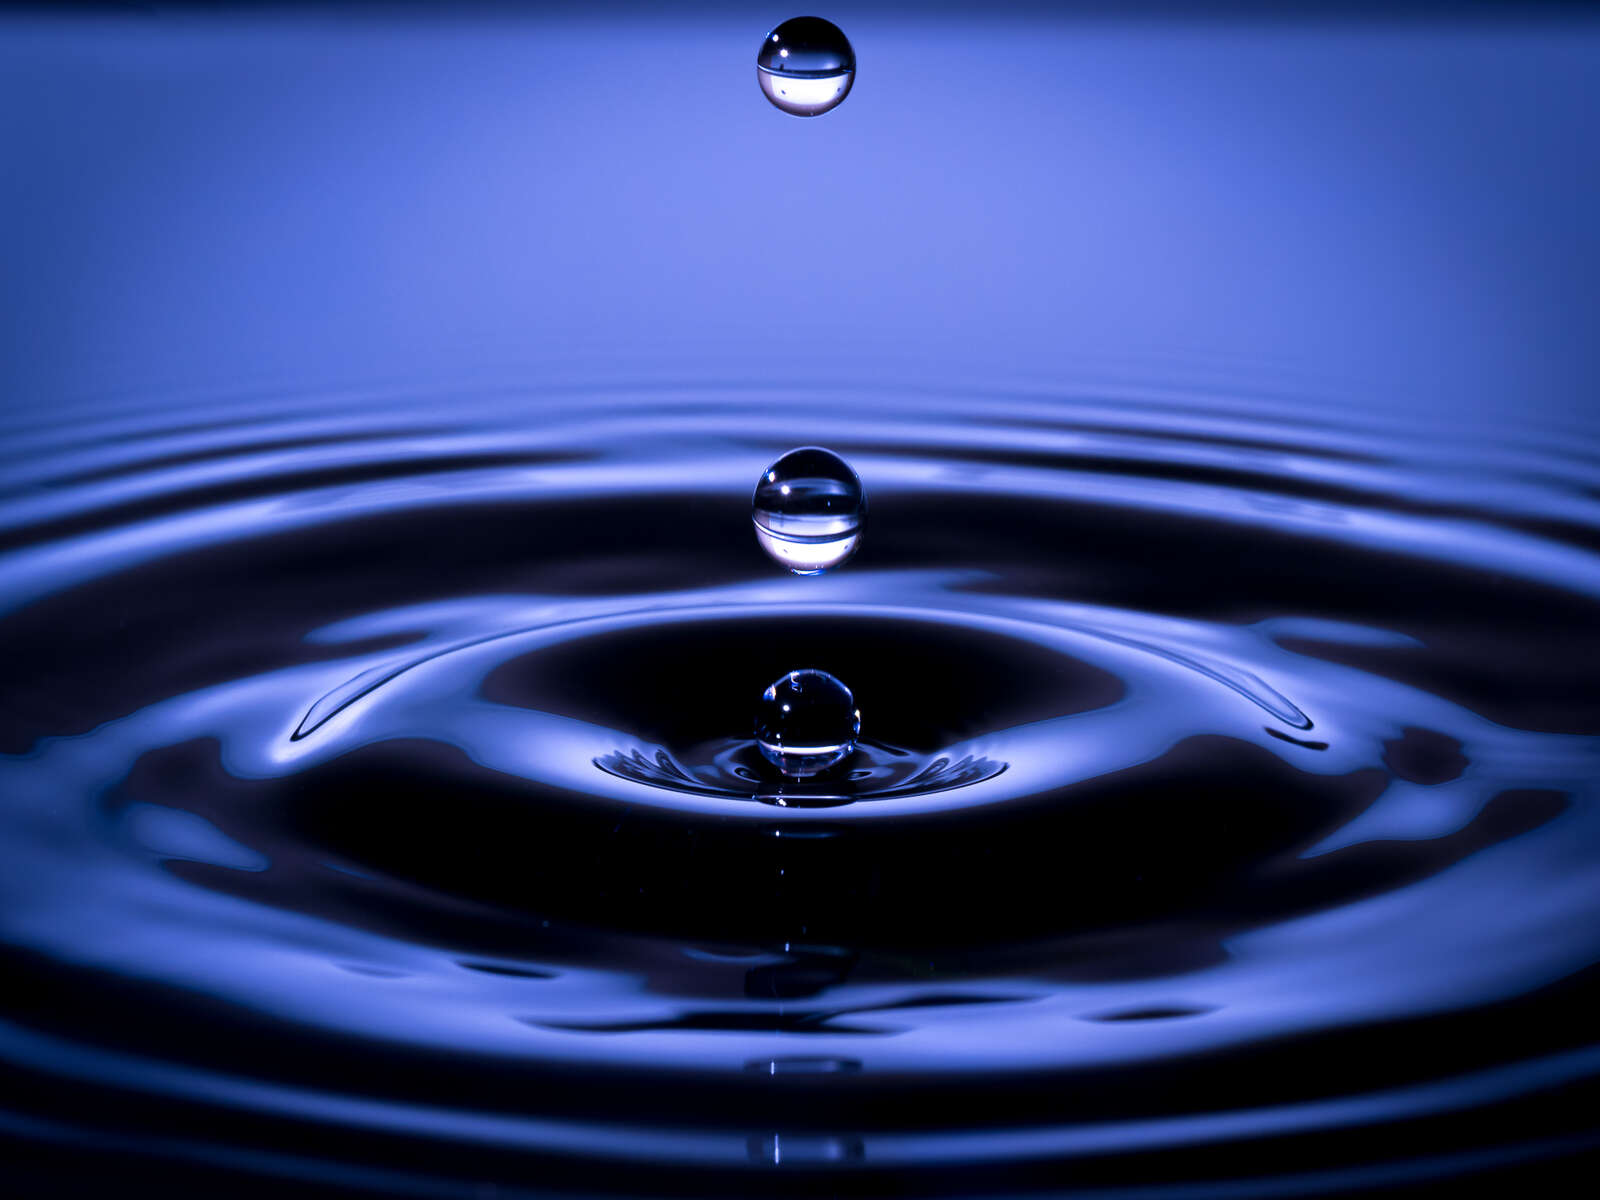 Capturing Water Droplets: A Quick How-To On Getting that Perfect Shot